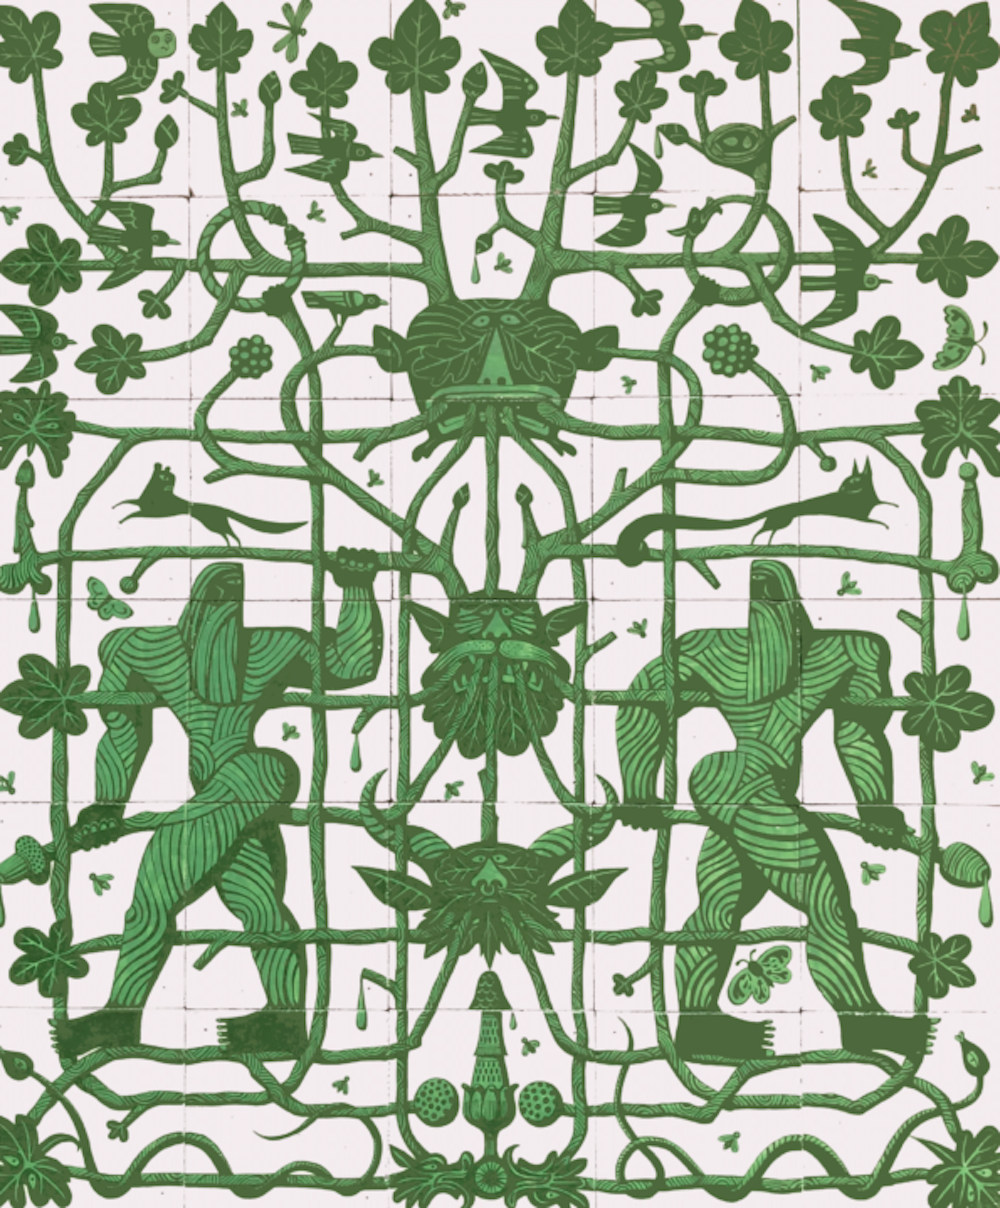 paul bommer &lsquo;green man&rsquo;